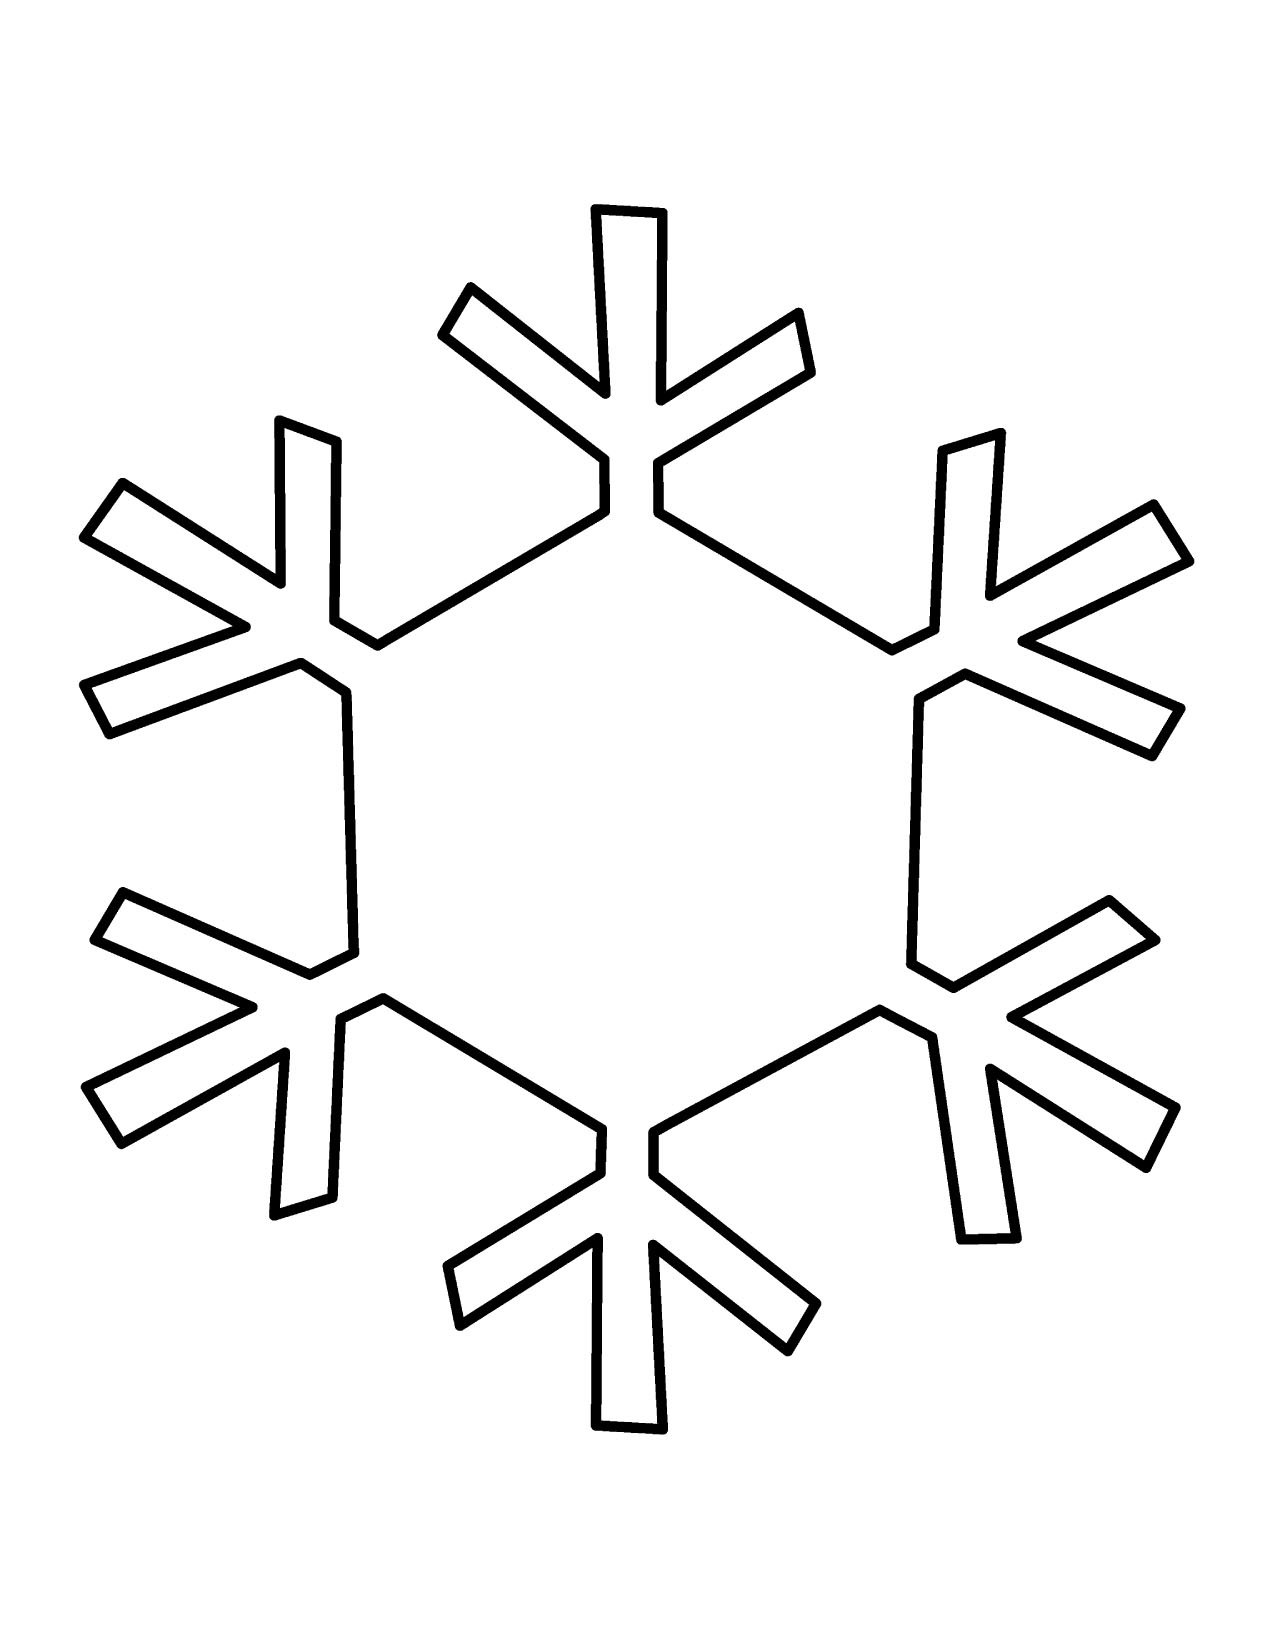 Free Snowflake Clipart Borders | Clipart Panda - Free Clipart Images